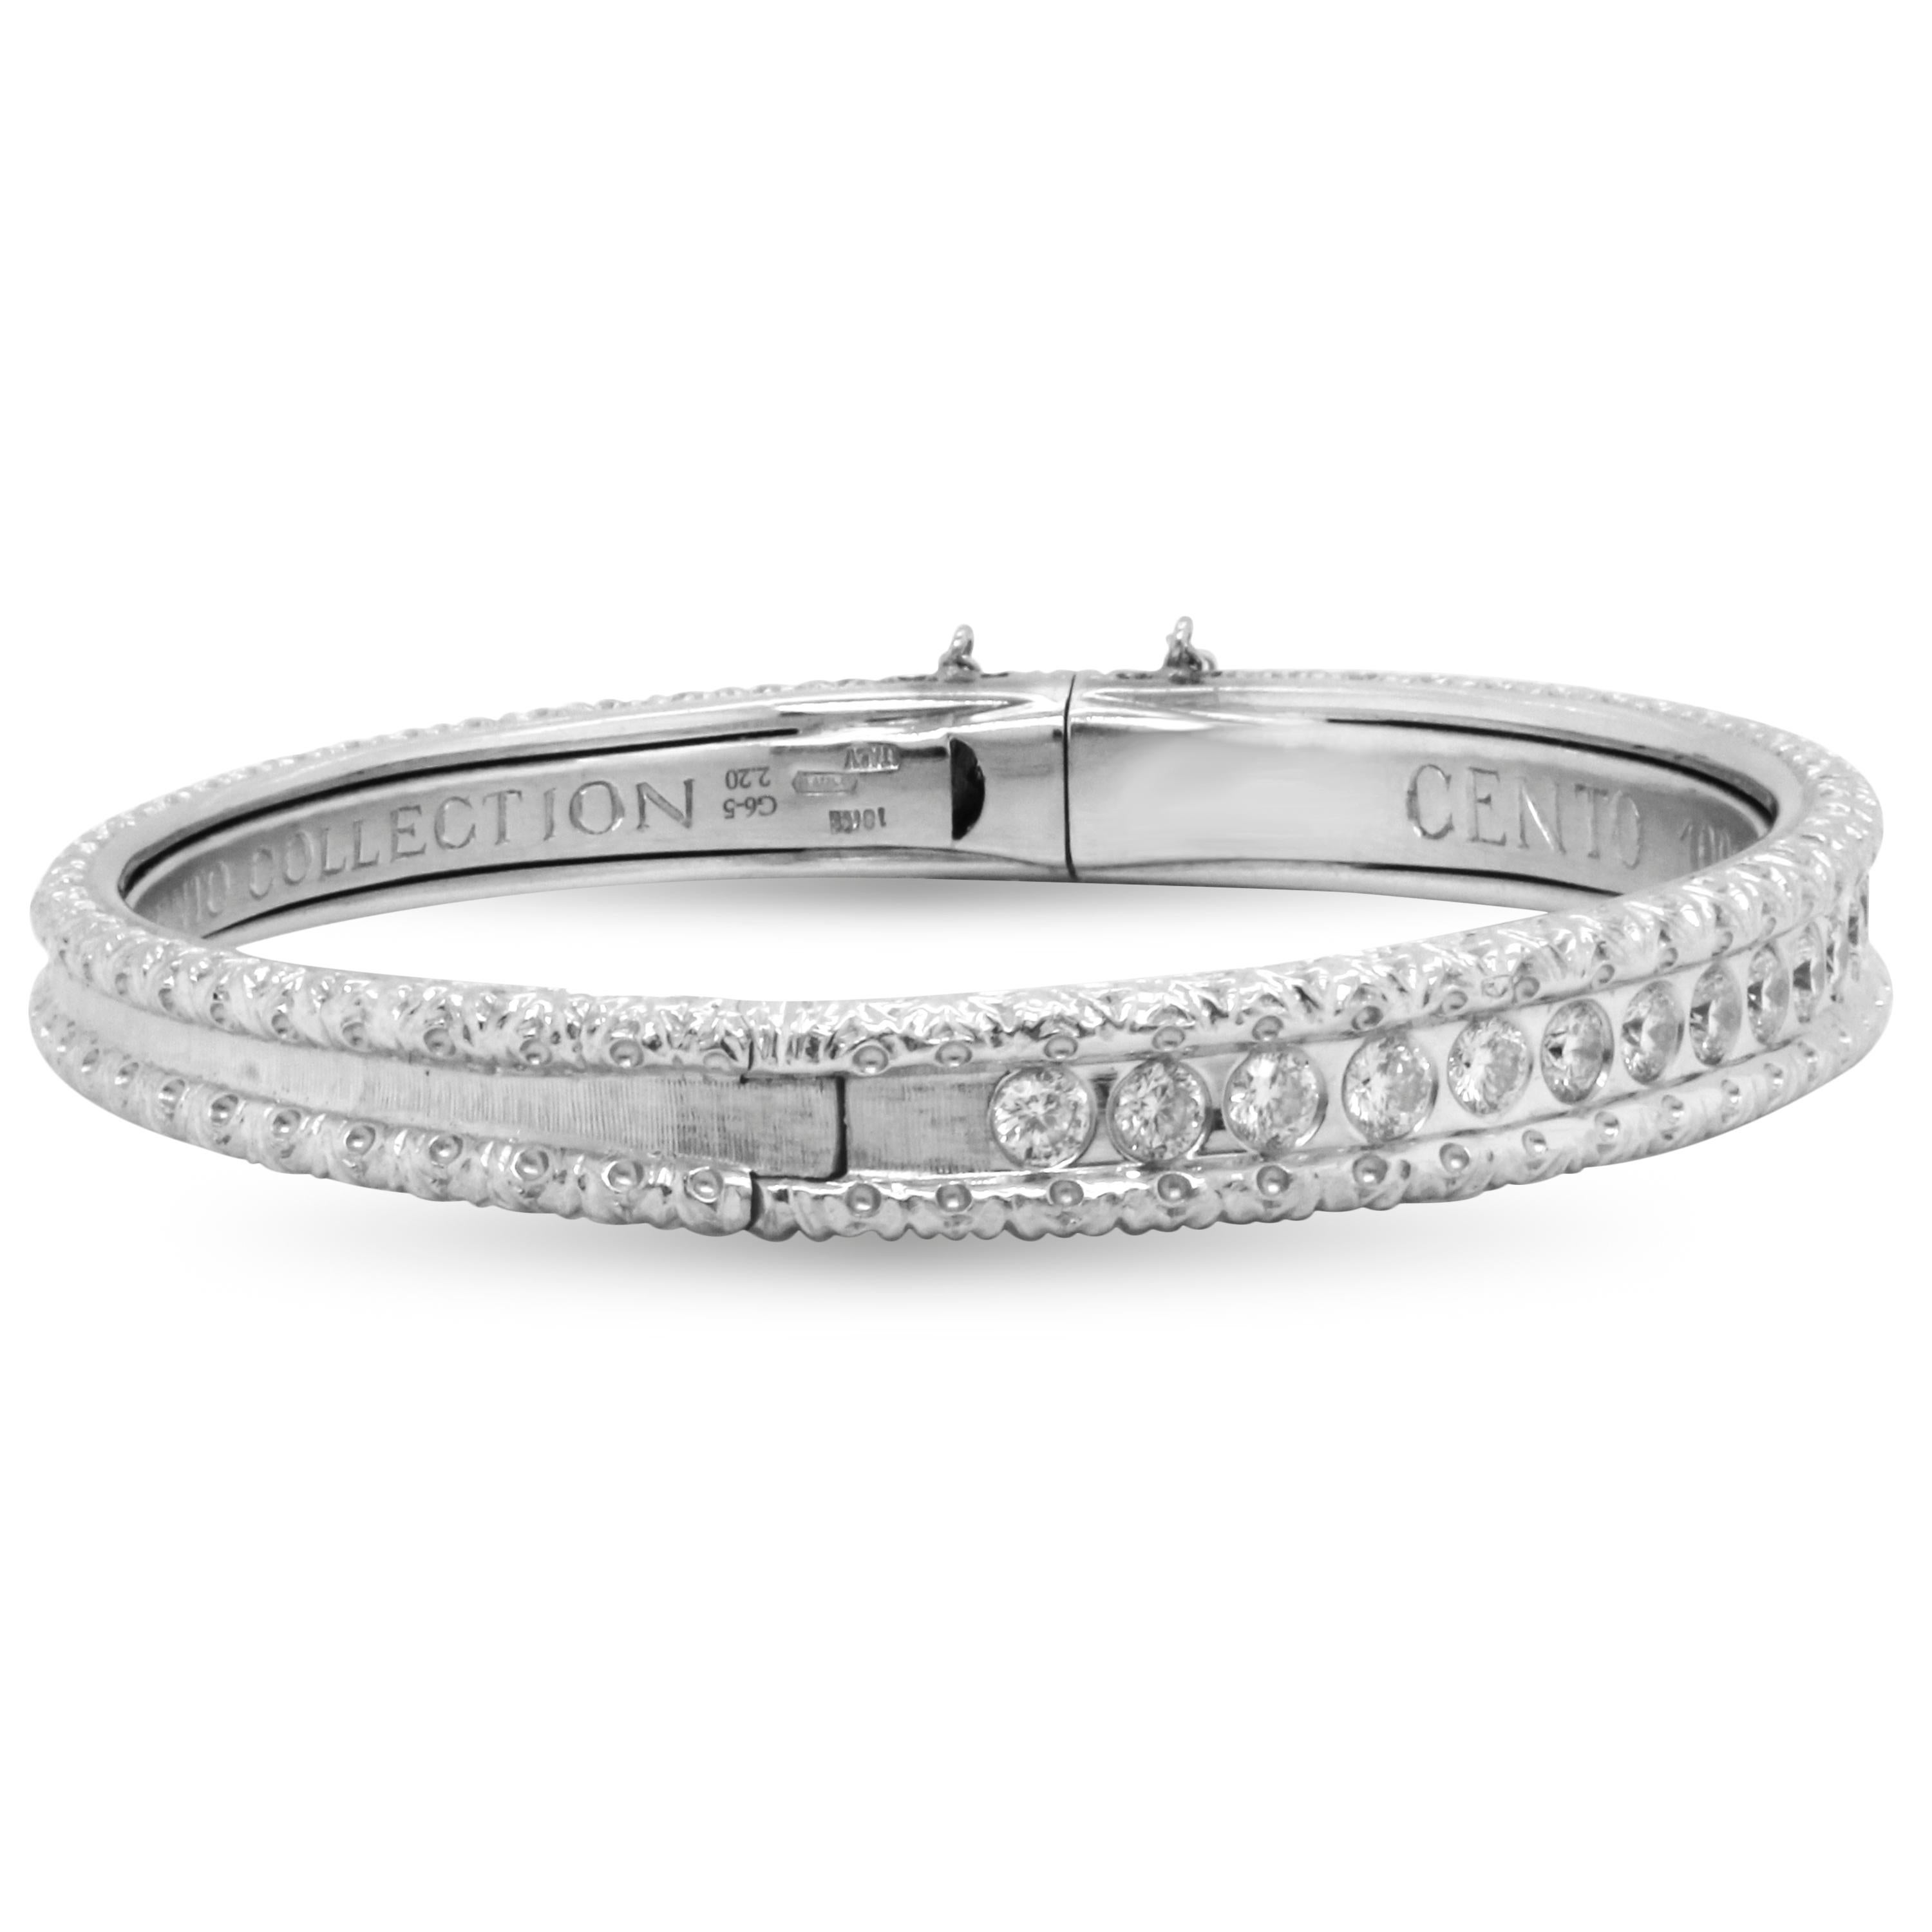 Roberto Coin Cento Collection 18K White Gold and Diamond Thin Bangle Bracelet

From the Cento Collection by Roberto Coin

This bracelet is done in solid 18k gold with diamonds set on one half.

Apprx. 2 carat G color, VS clarity diamonds total